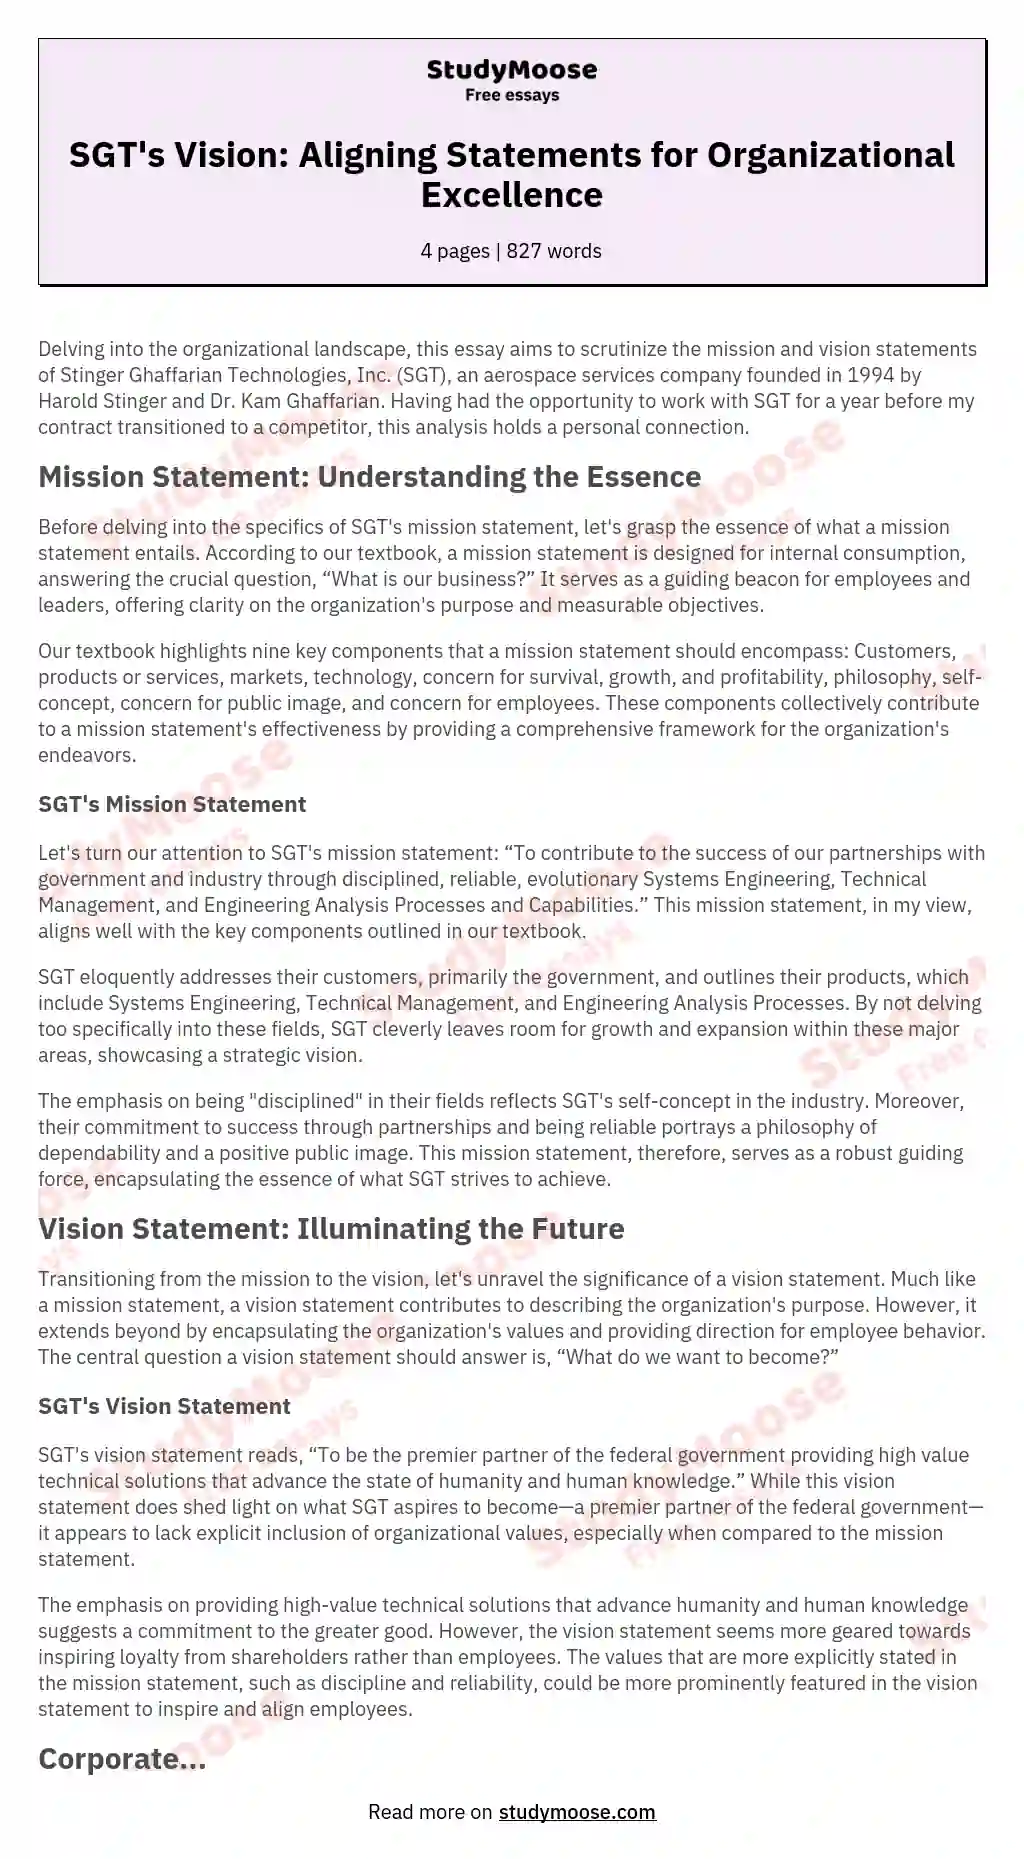 SGT's Vision: Aligning Statements for Organizational Excellence essay